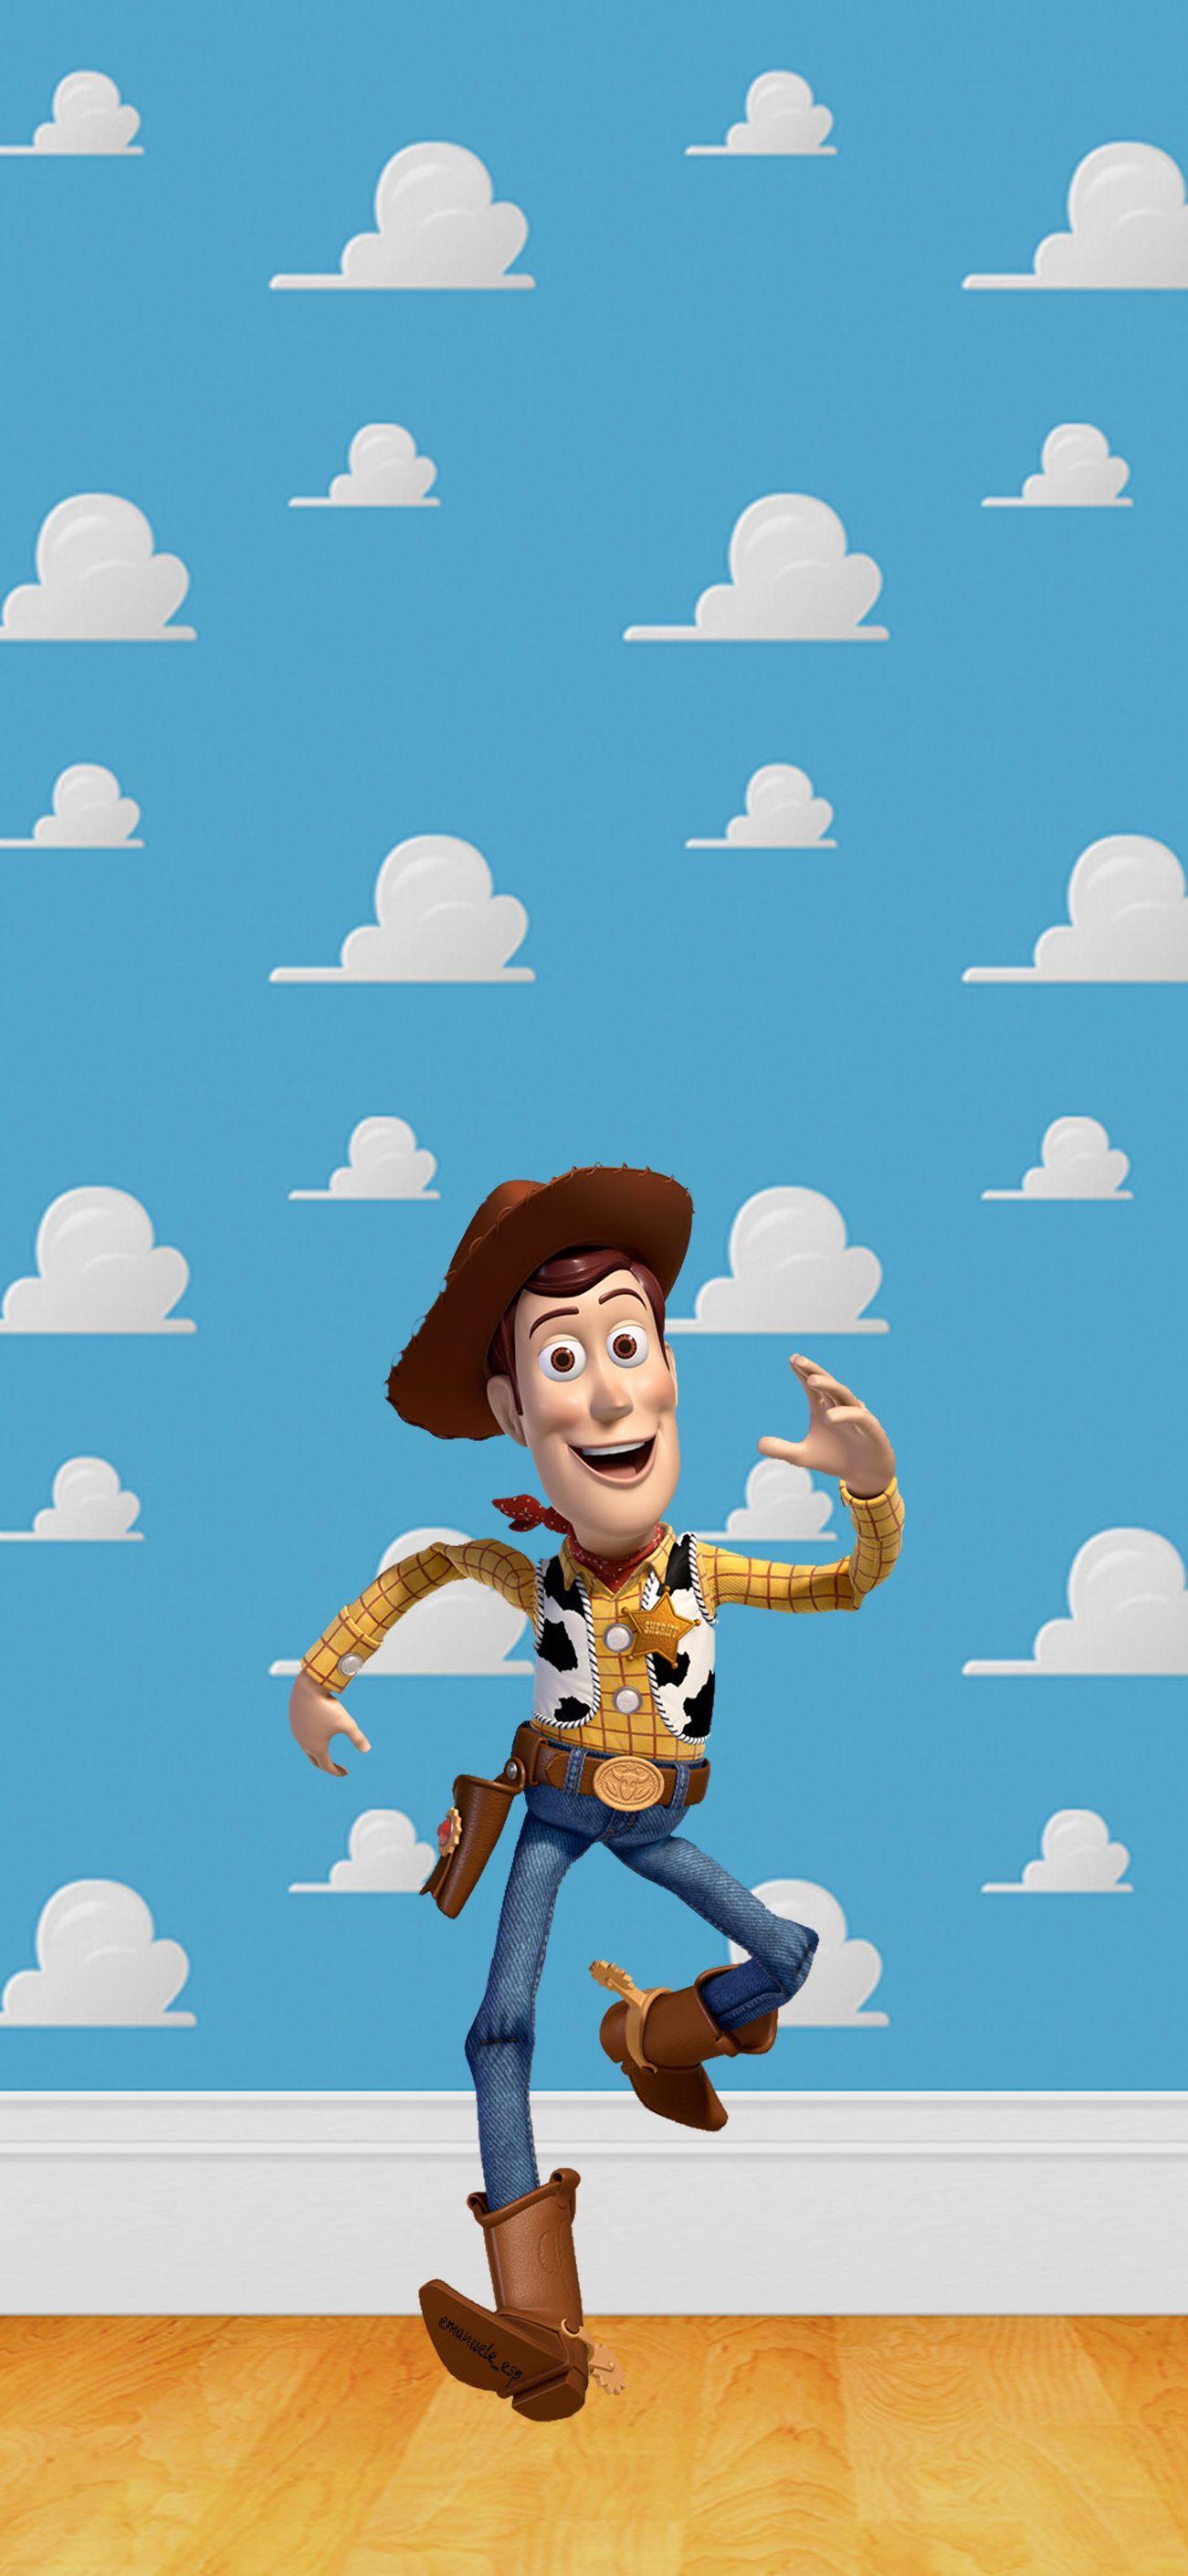 toy story iphone hd wallpapers wallpaper cave on toy story iphone hd wallpapers